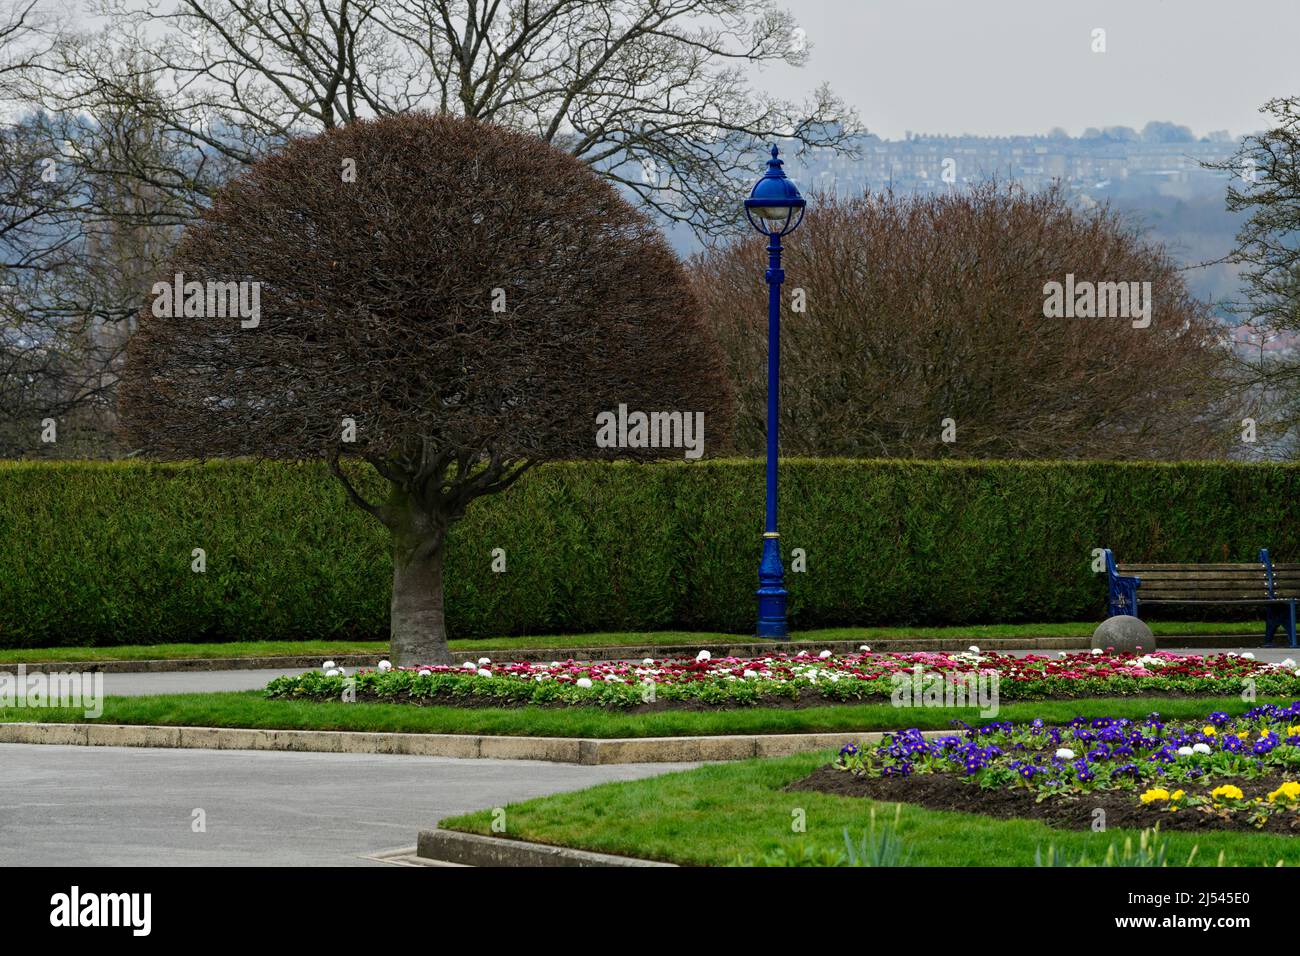 Scenic urban municipal amenity (bright bedding flowers on well-tended defined borders, pathways, bench seat) - Lister Park, Bradford, England, UK. Stock Photo